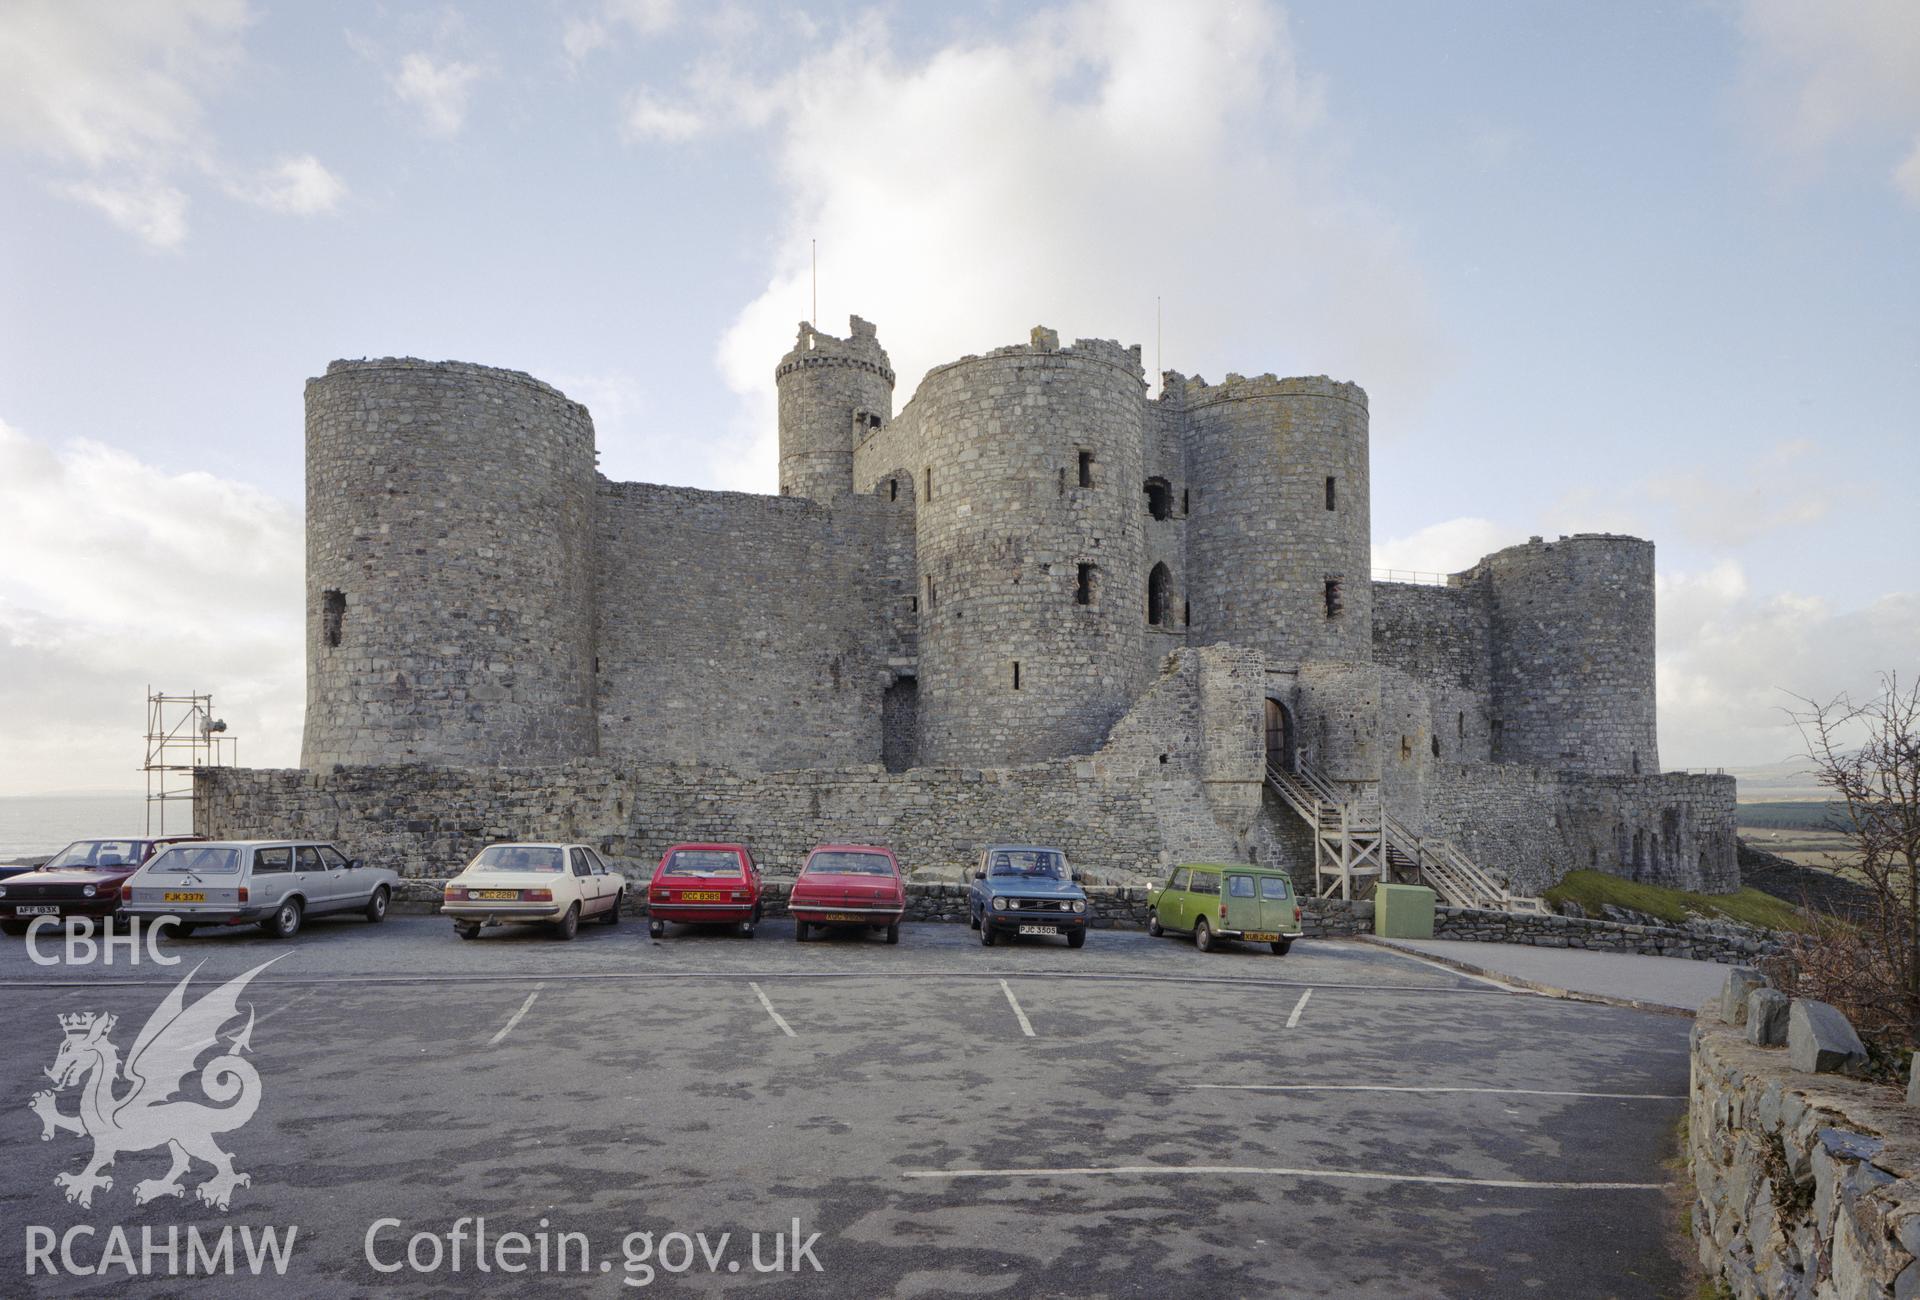 Photographic colour negative showing view of Harlech castle; collated by the former Central Office of Information.